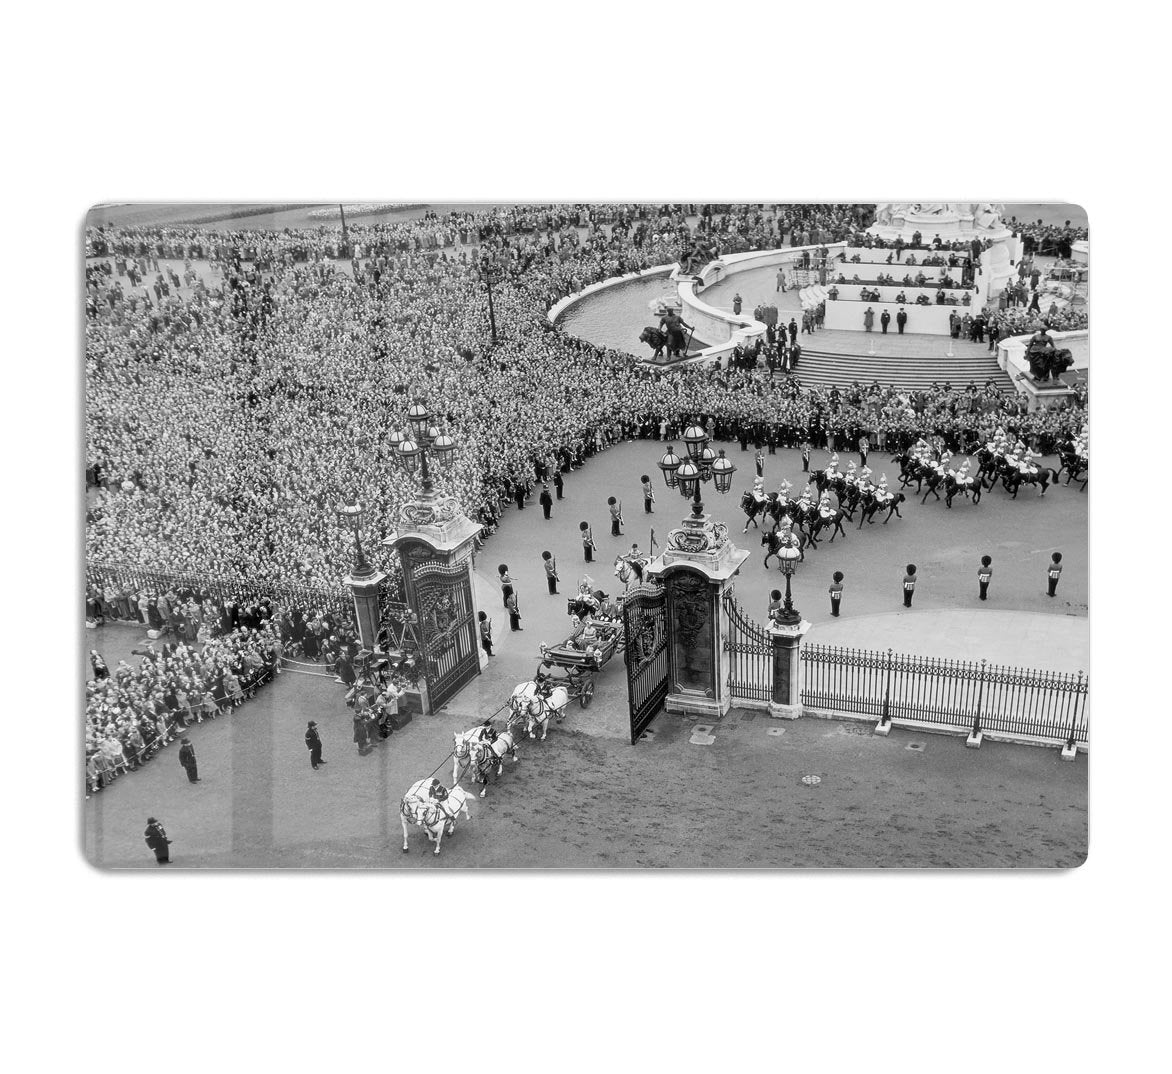 Queen Elizabeth II Coronation arriving home from a foreign tour HD Metal Print